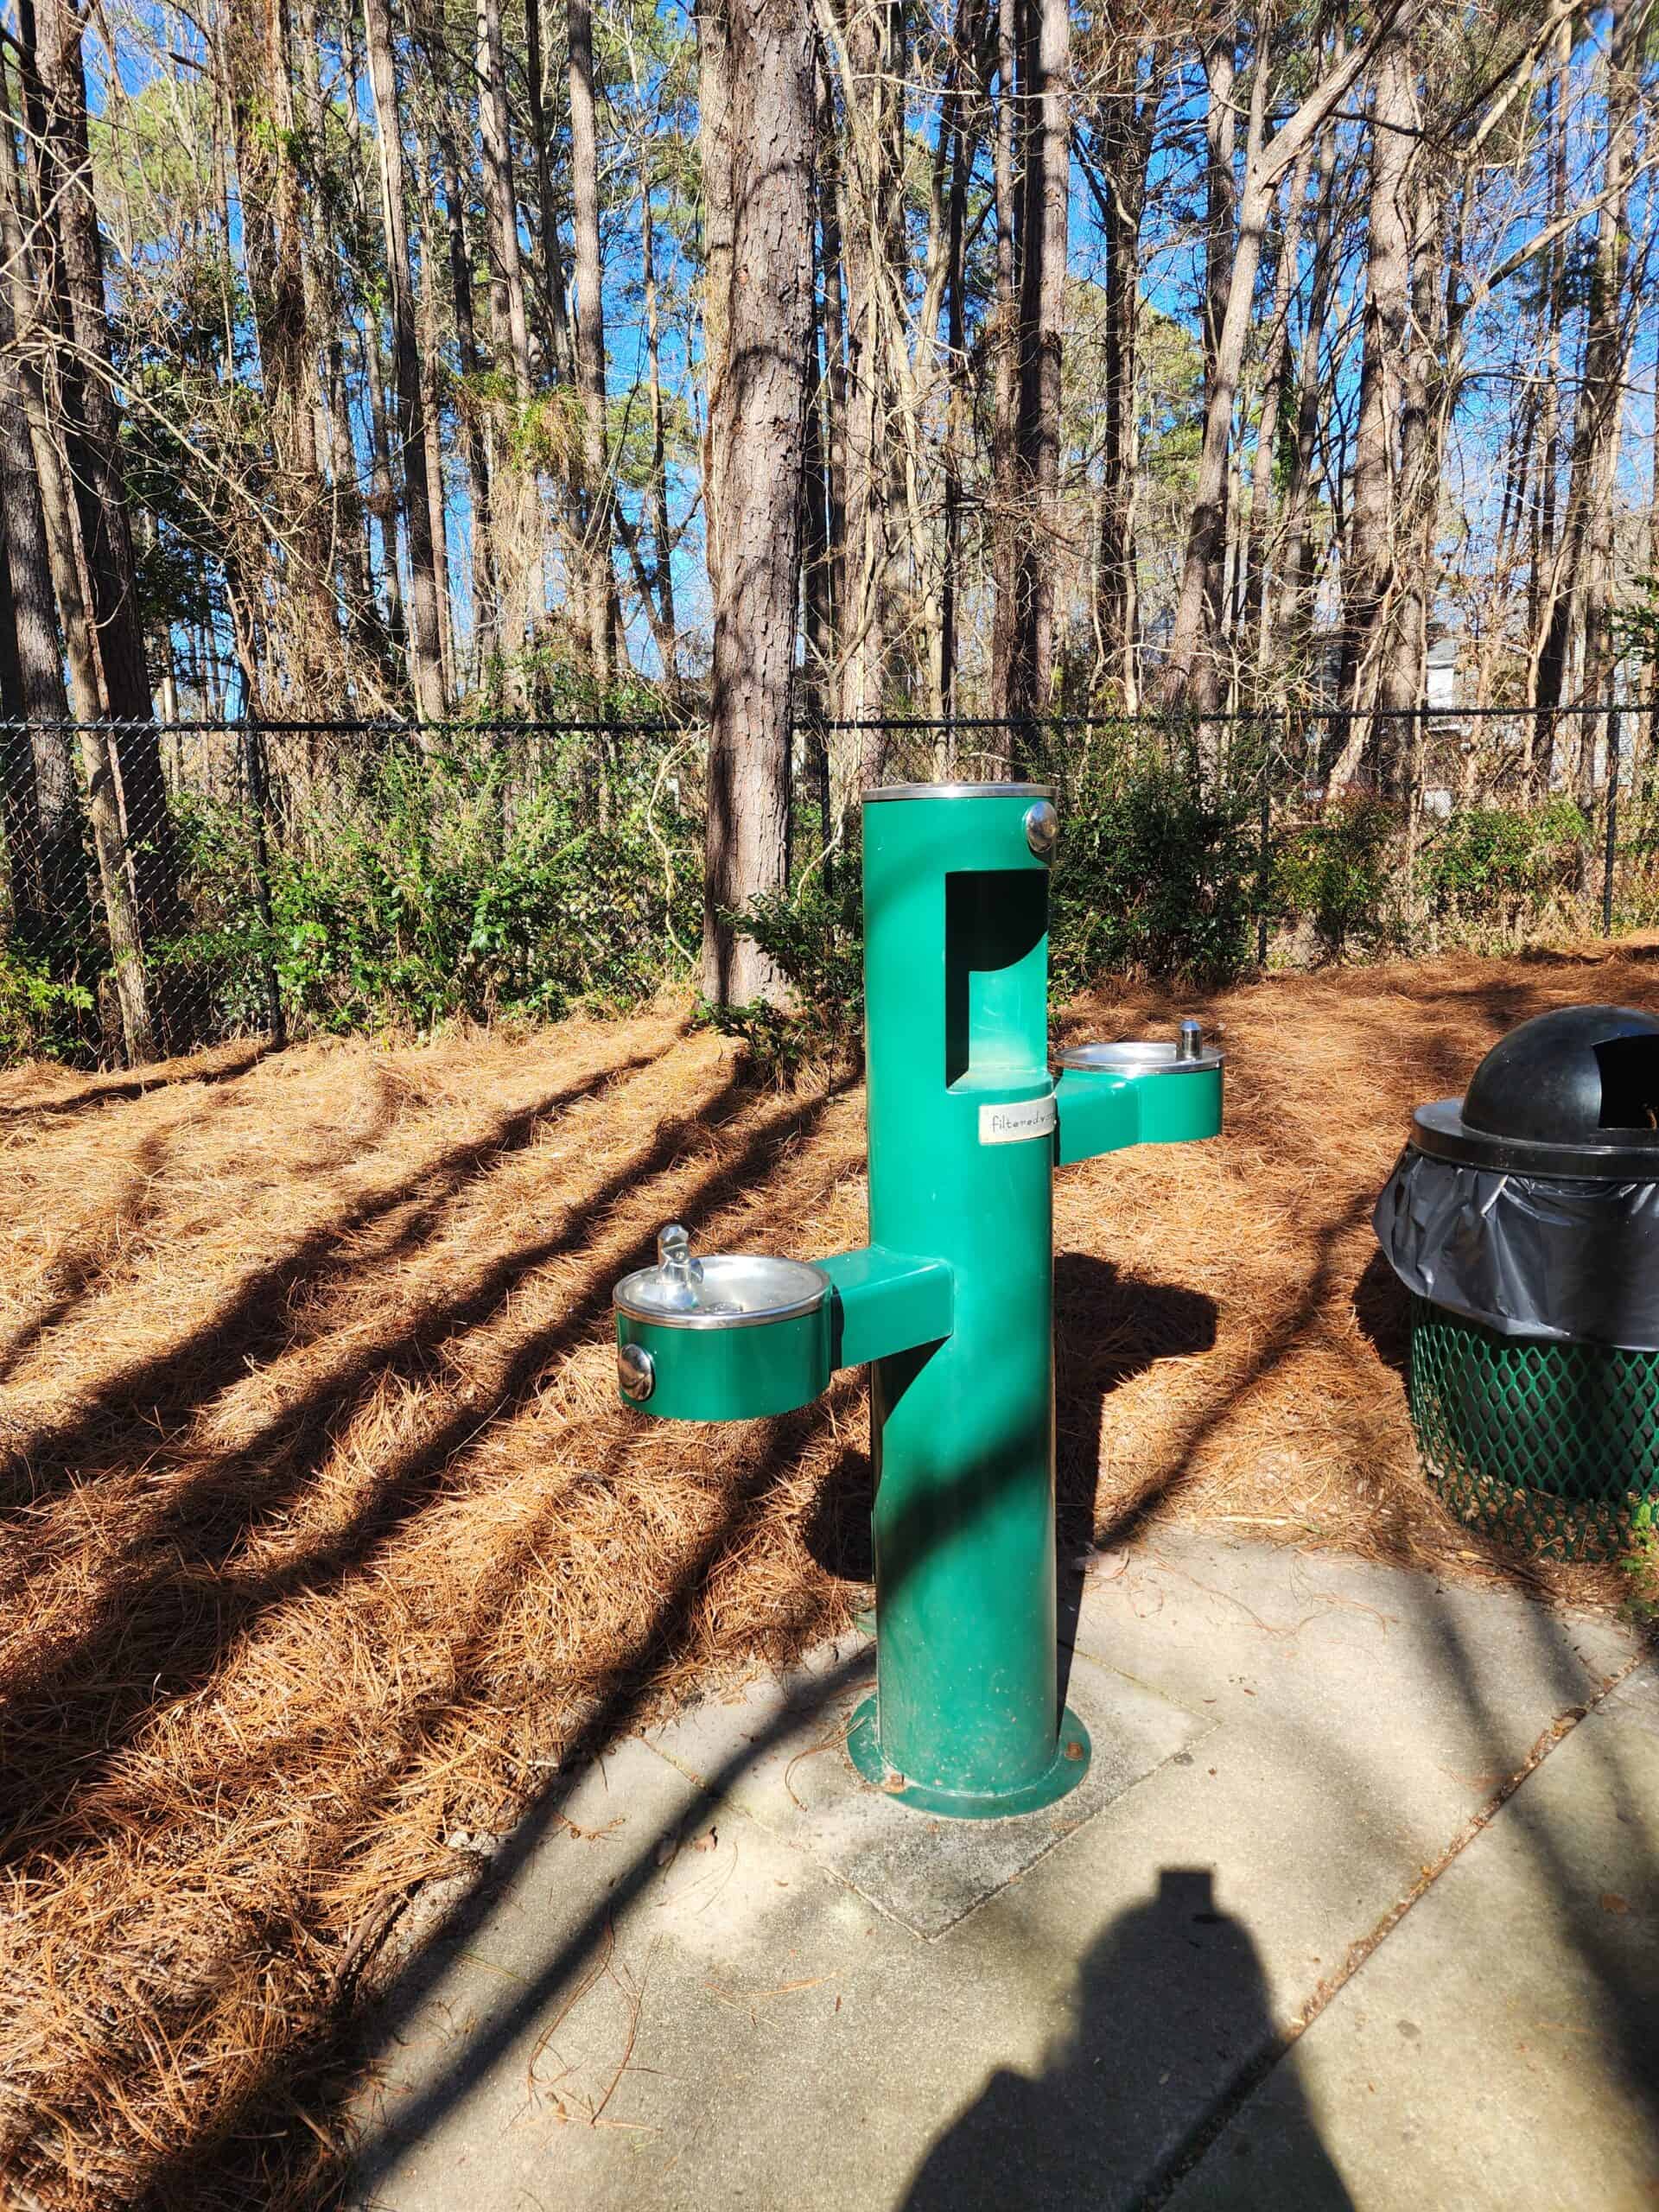 A green water fountain station, featuring an accessible option at a lower height, stands ready for park-goers in a Cary, North Carolina playground. Tall pine trees provide a natural backdrop to this convenient hydration point, with pine straw-covered ground and a nearby trash receptacle ensuring cleanliness and sustainability